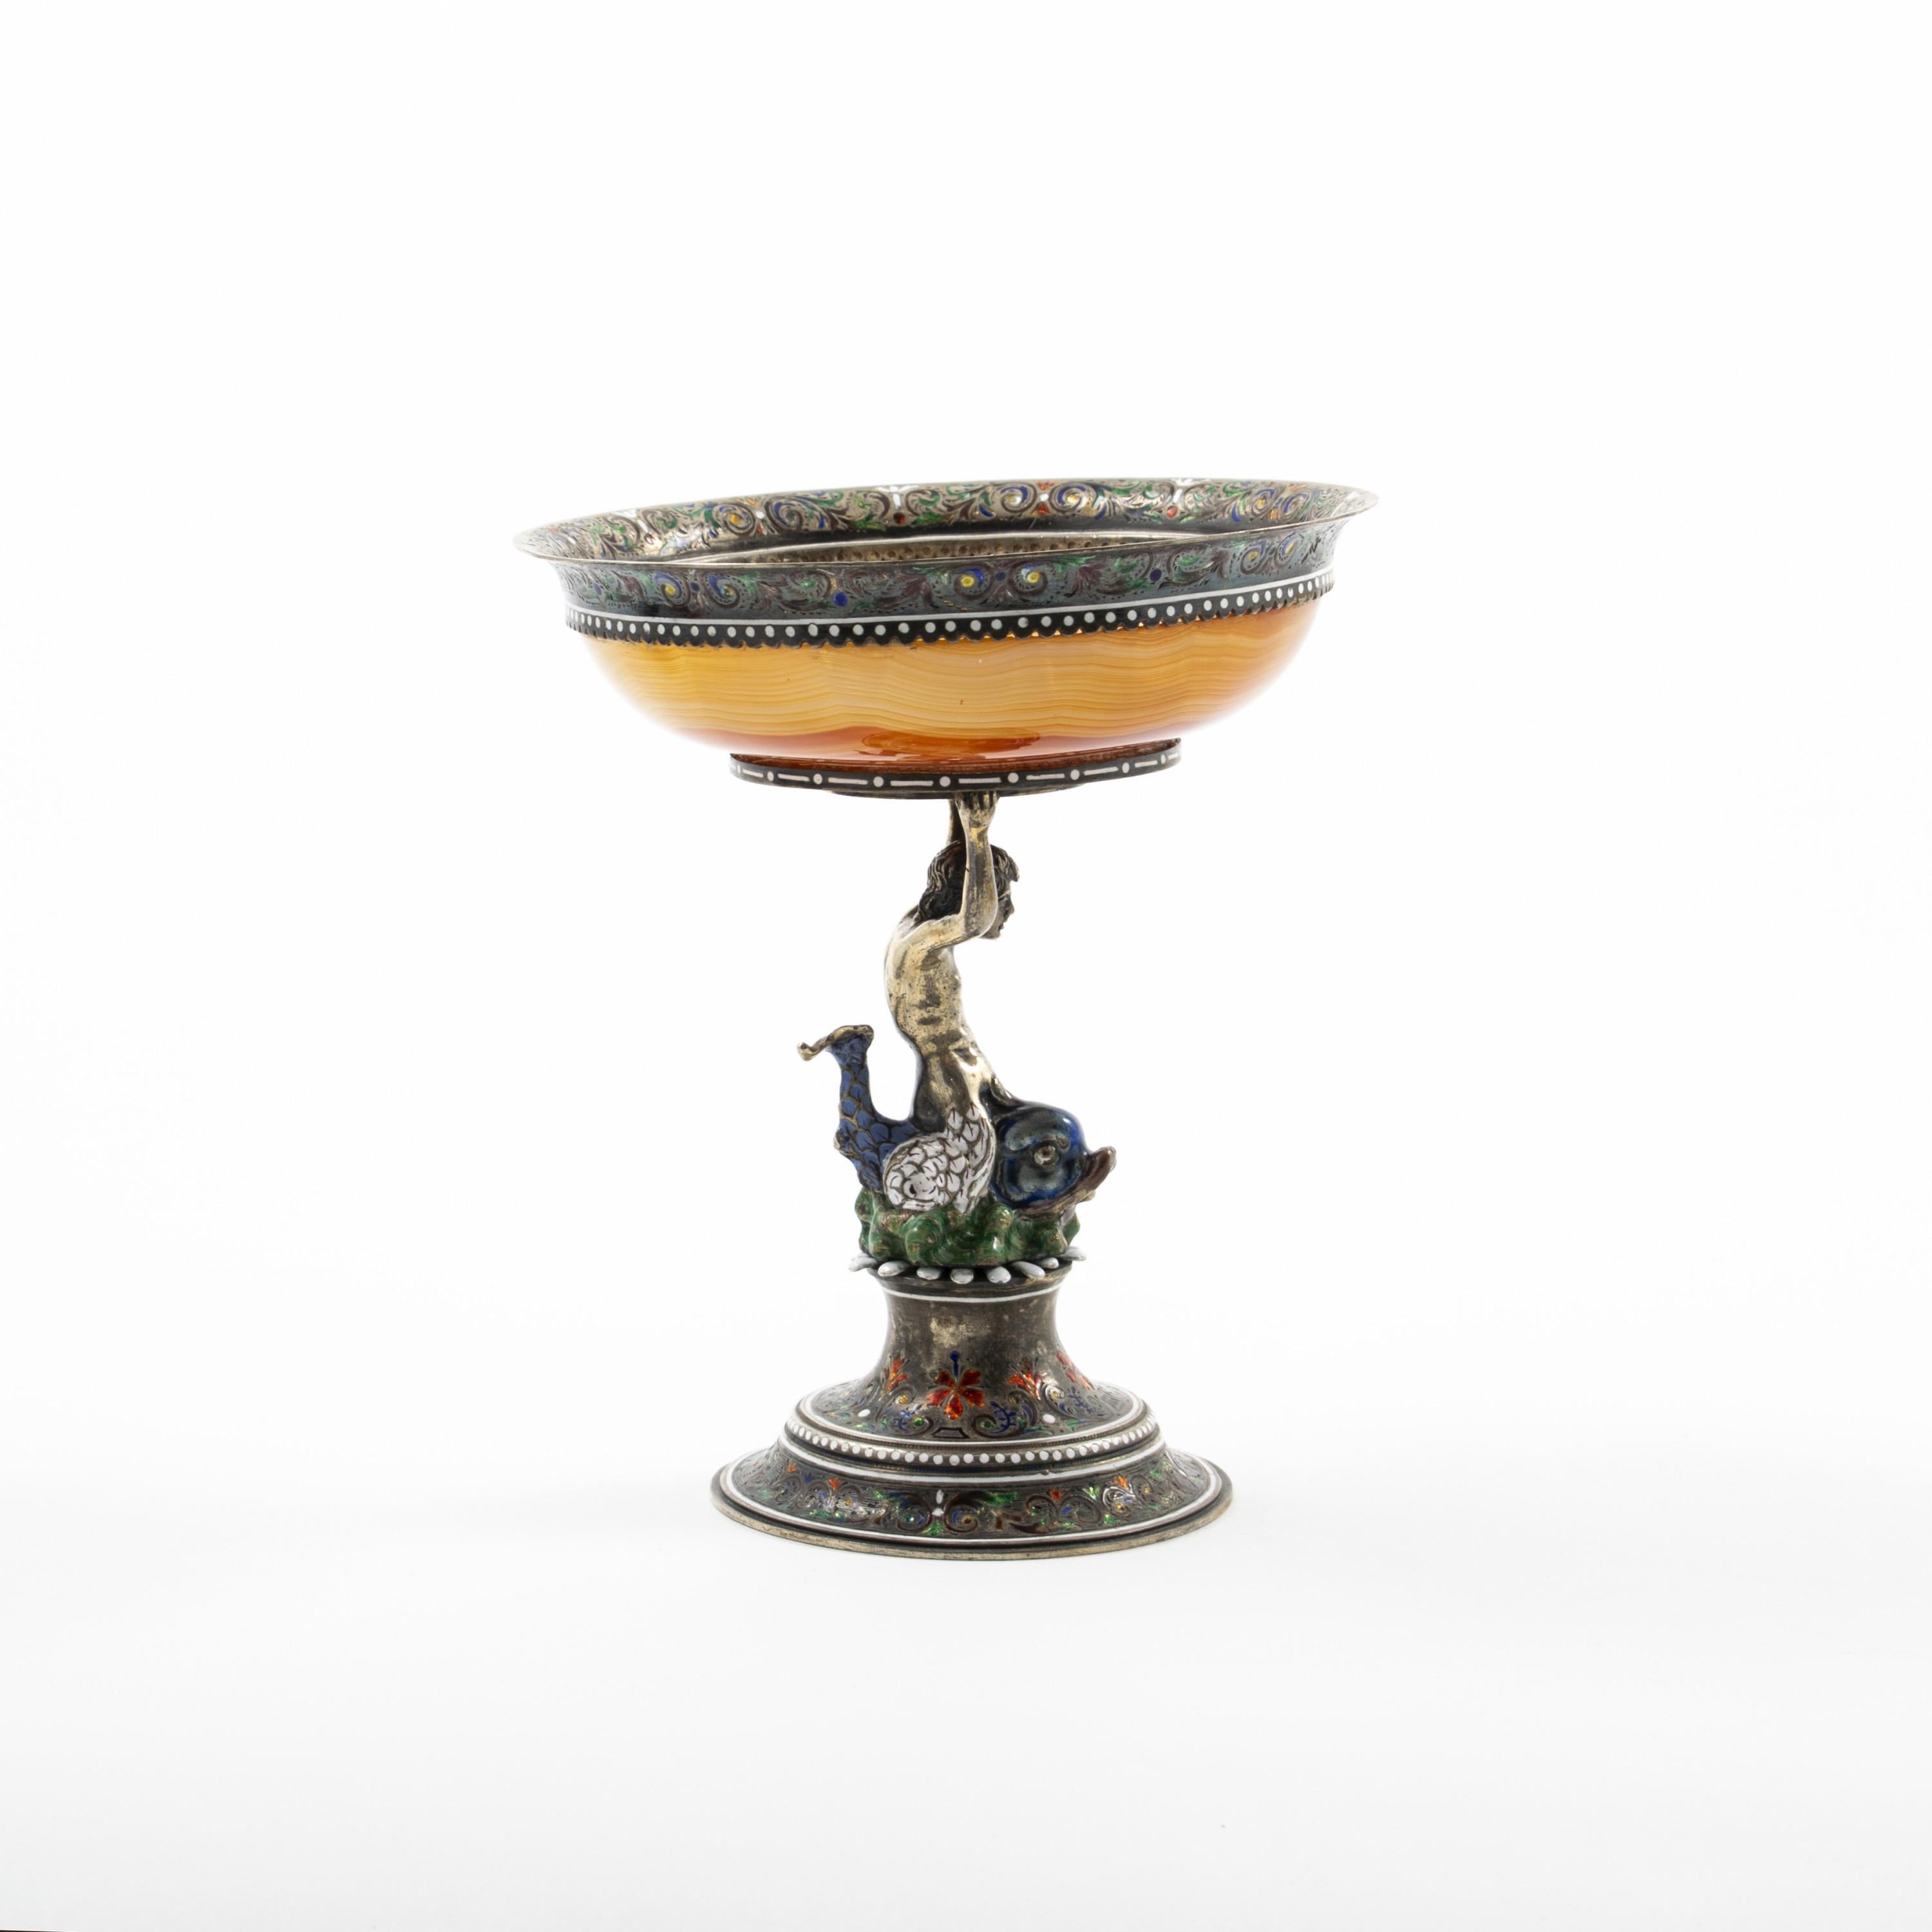 German Art Nouveau pedestal caviar server.
Agate stone bowl mounted with sterling silver adorned with enamel decorations.
Stand with figural merman sitting on top of a dolphin.
This impressive bowl was made by J.D. Schleissner and Sons of Hanau,